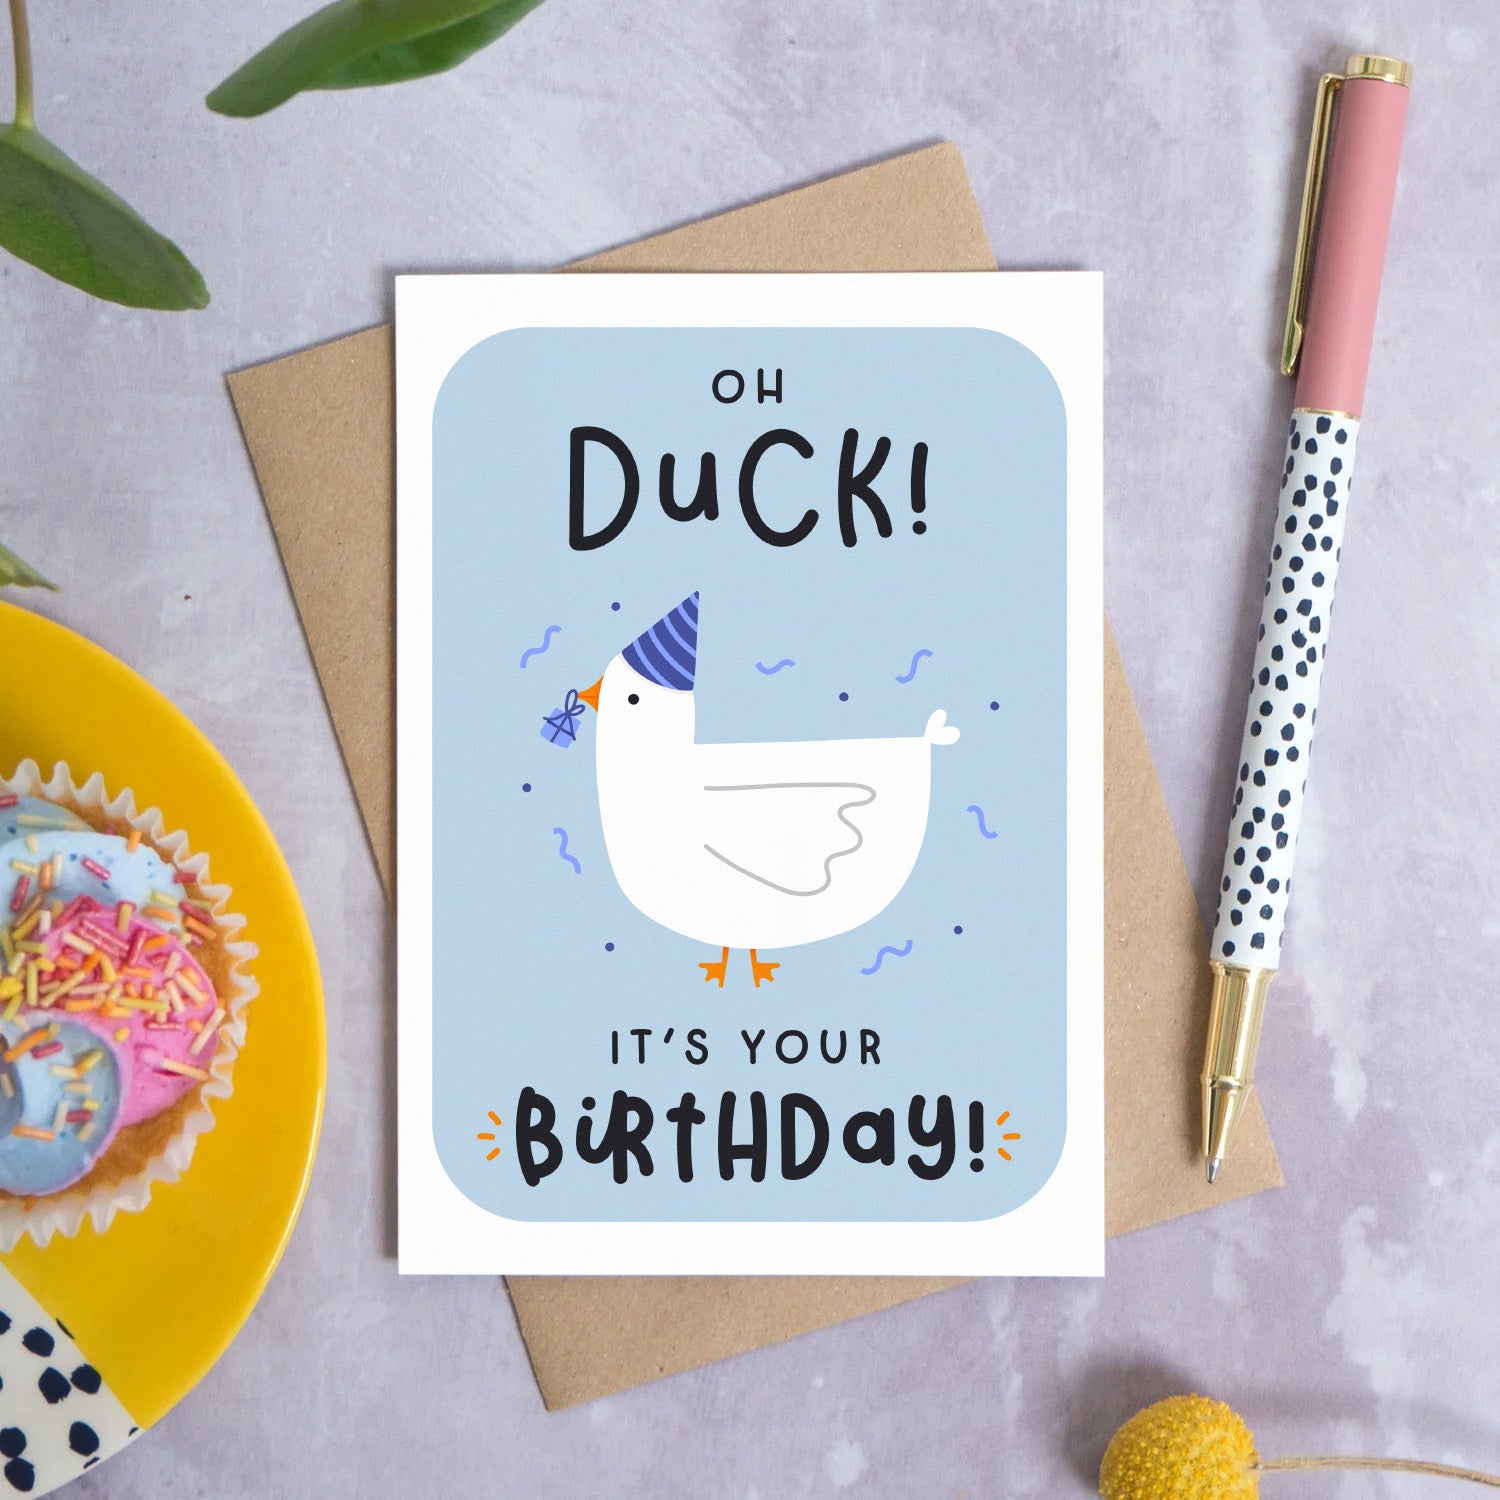 A birthday card featuring a duck in a party hat with a present in it’s beak with the words ‘oh duck, it’s your birthday!’. The card is lying on a Kraft brown envelope on a grey surface. Surrounding the card are leaves, flowers, a pen and a cupcake on a plate.